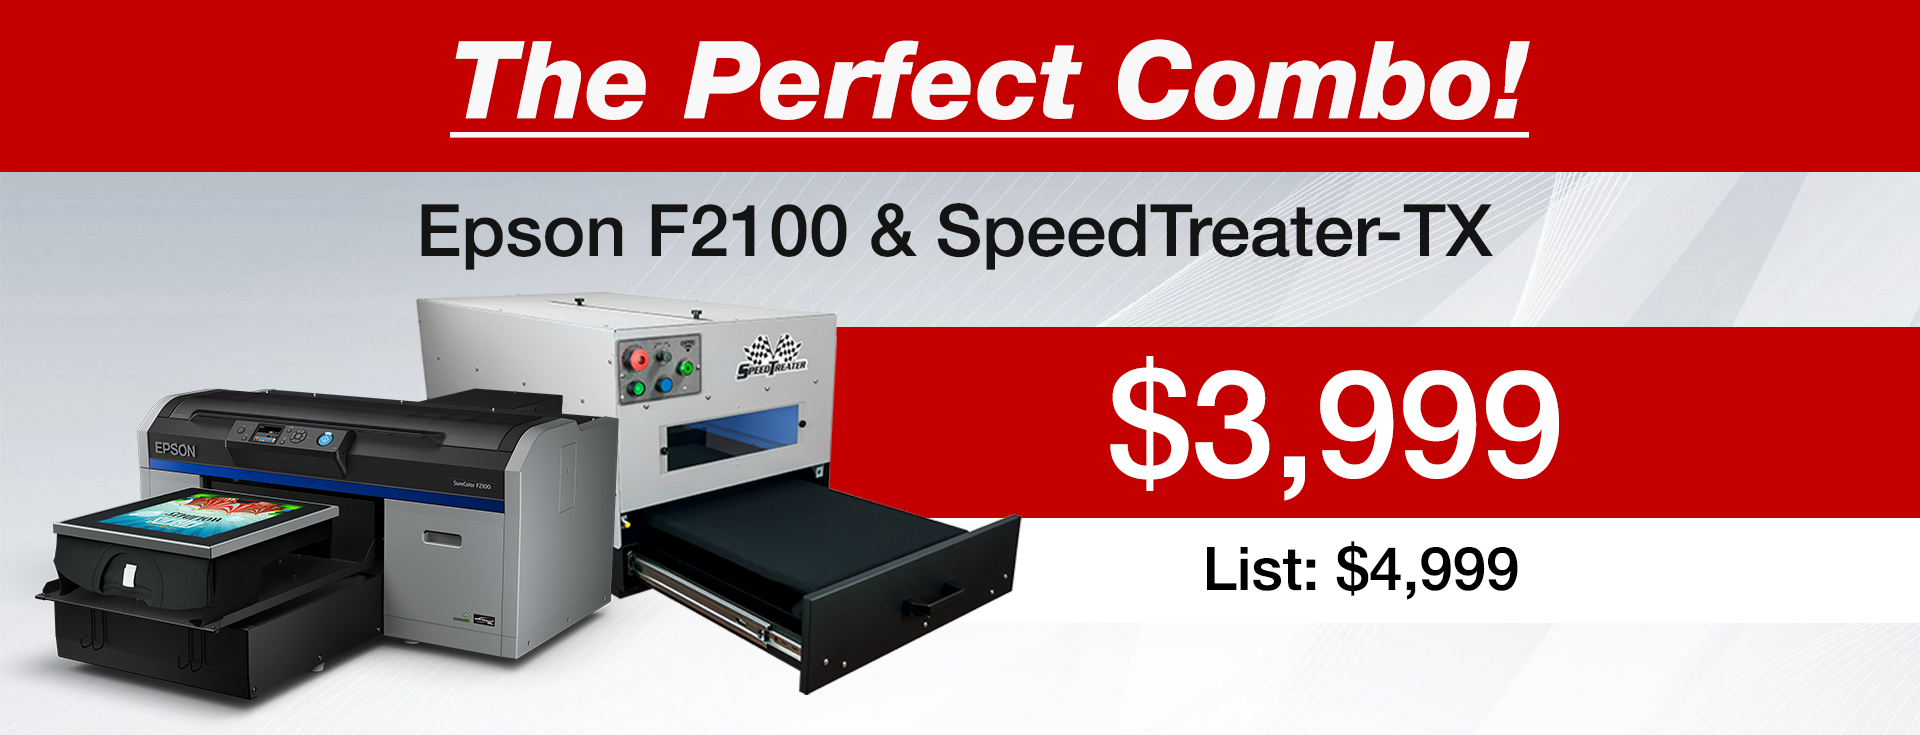 The Perfect Combo - Epson F2100 and SpeedTreater-TX